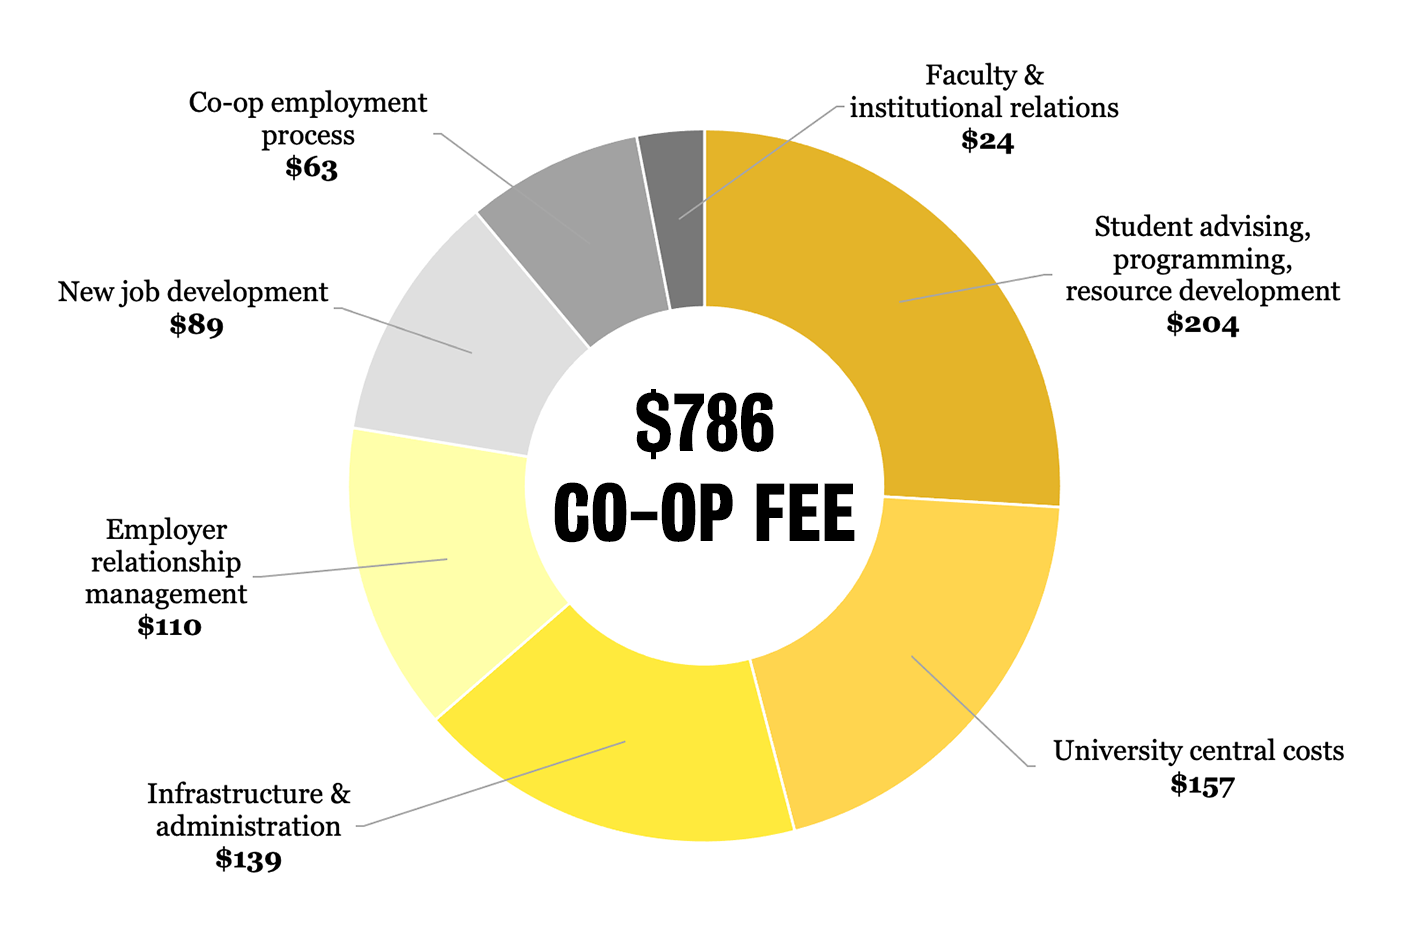  Co-op employment process = $63Student advising, programming and resource development = $204ER management = $110Faculty and institutional relations = $24New job development = $89Infrastructure and administration = $139University central costs = $157